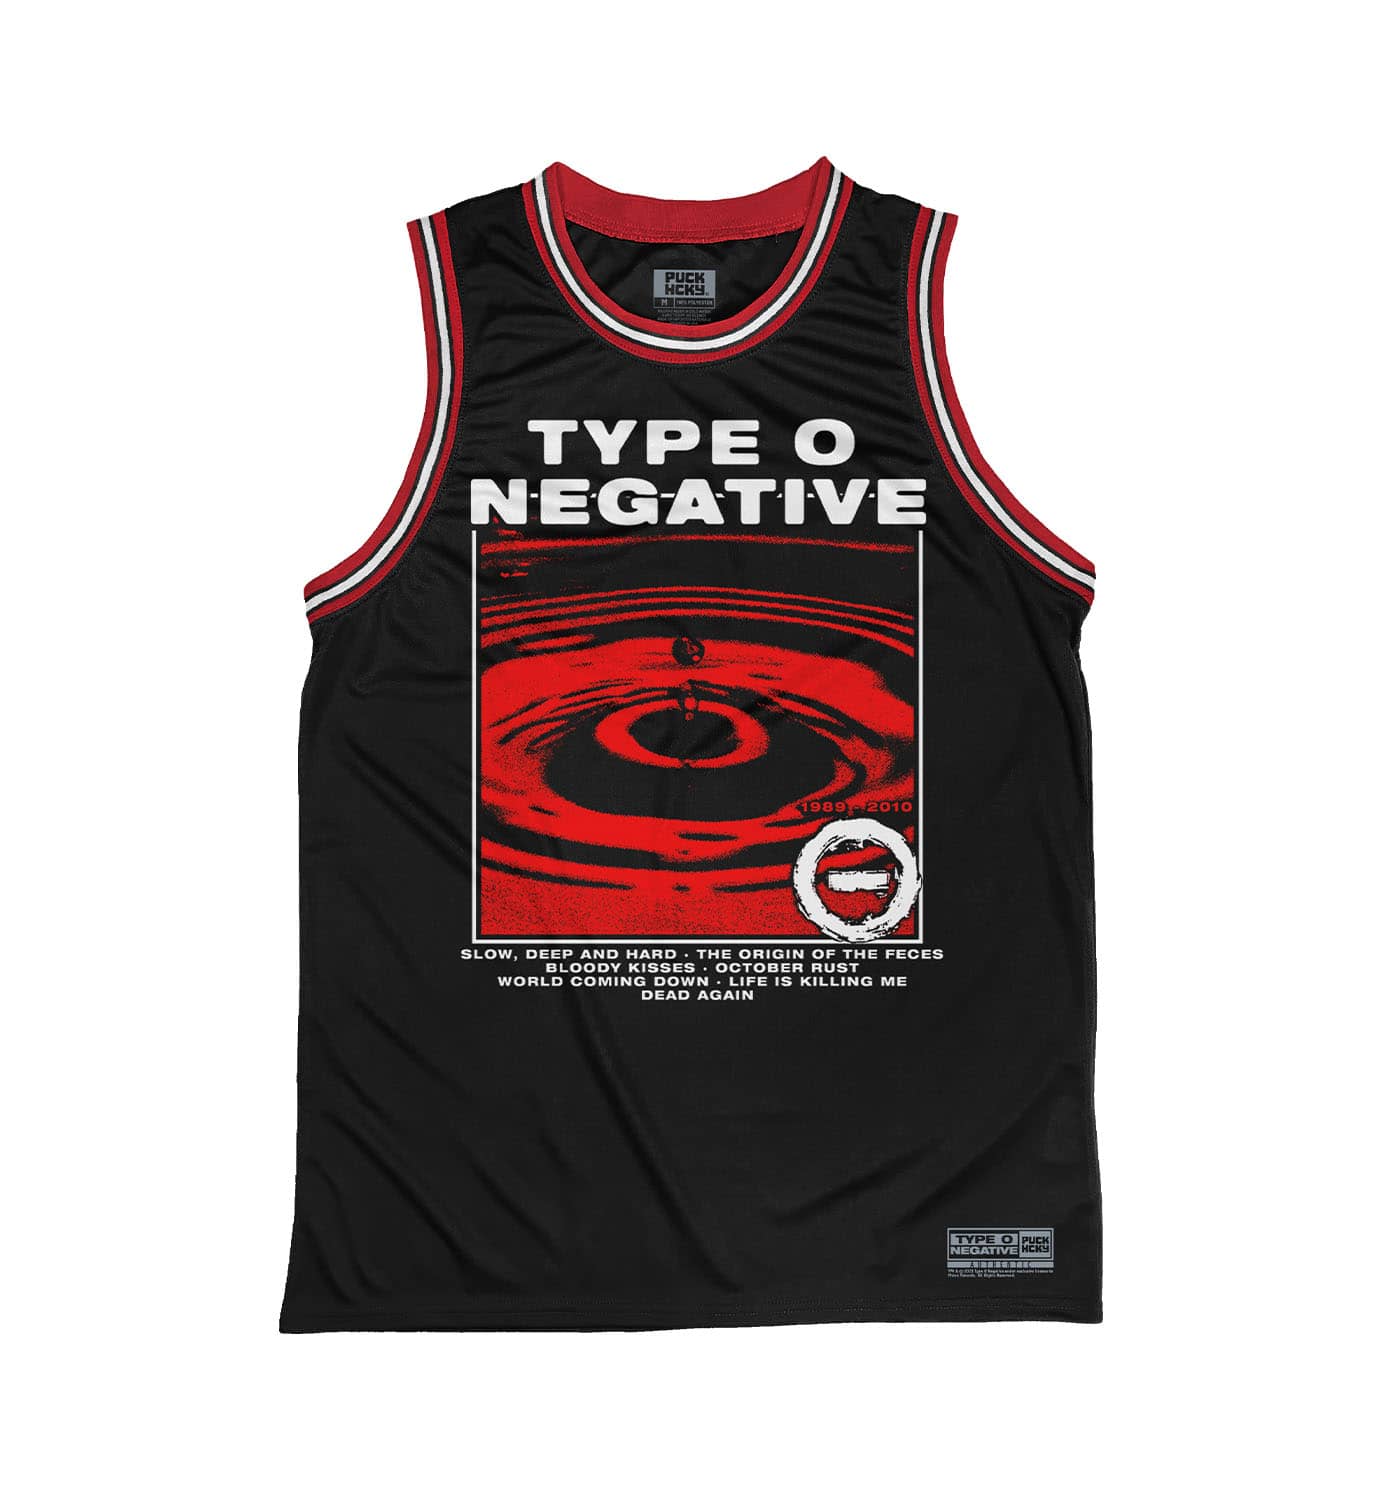 TYPE O NEGATIVE 'DISCOG' sleeveless summer league jersey in black, red, and white front view